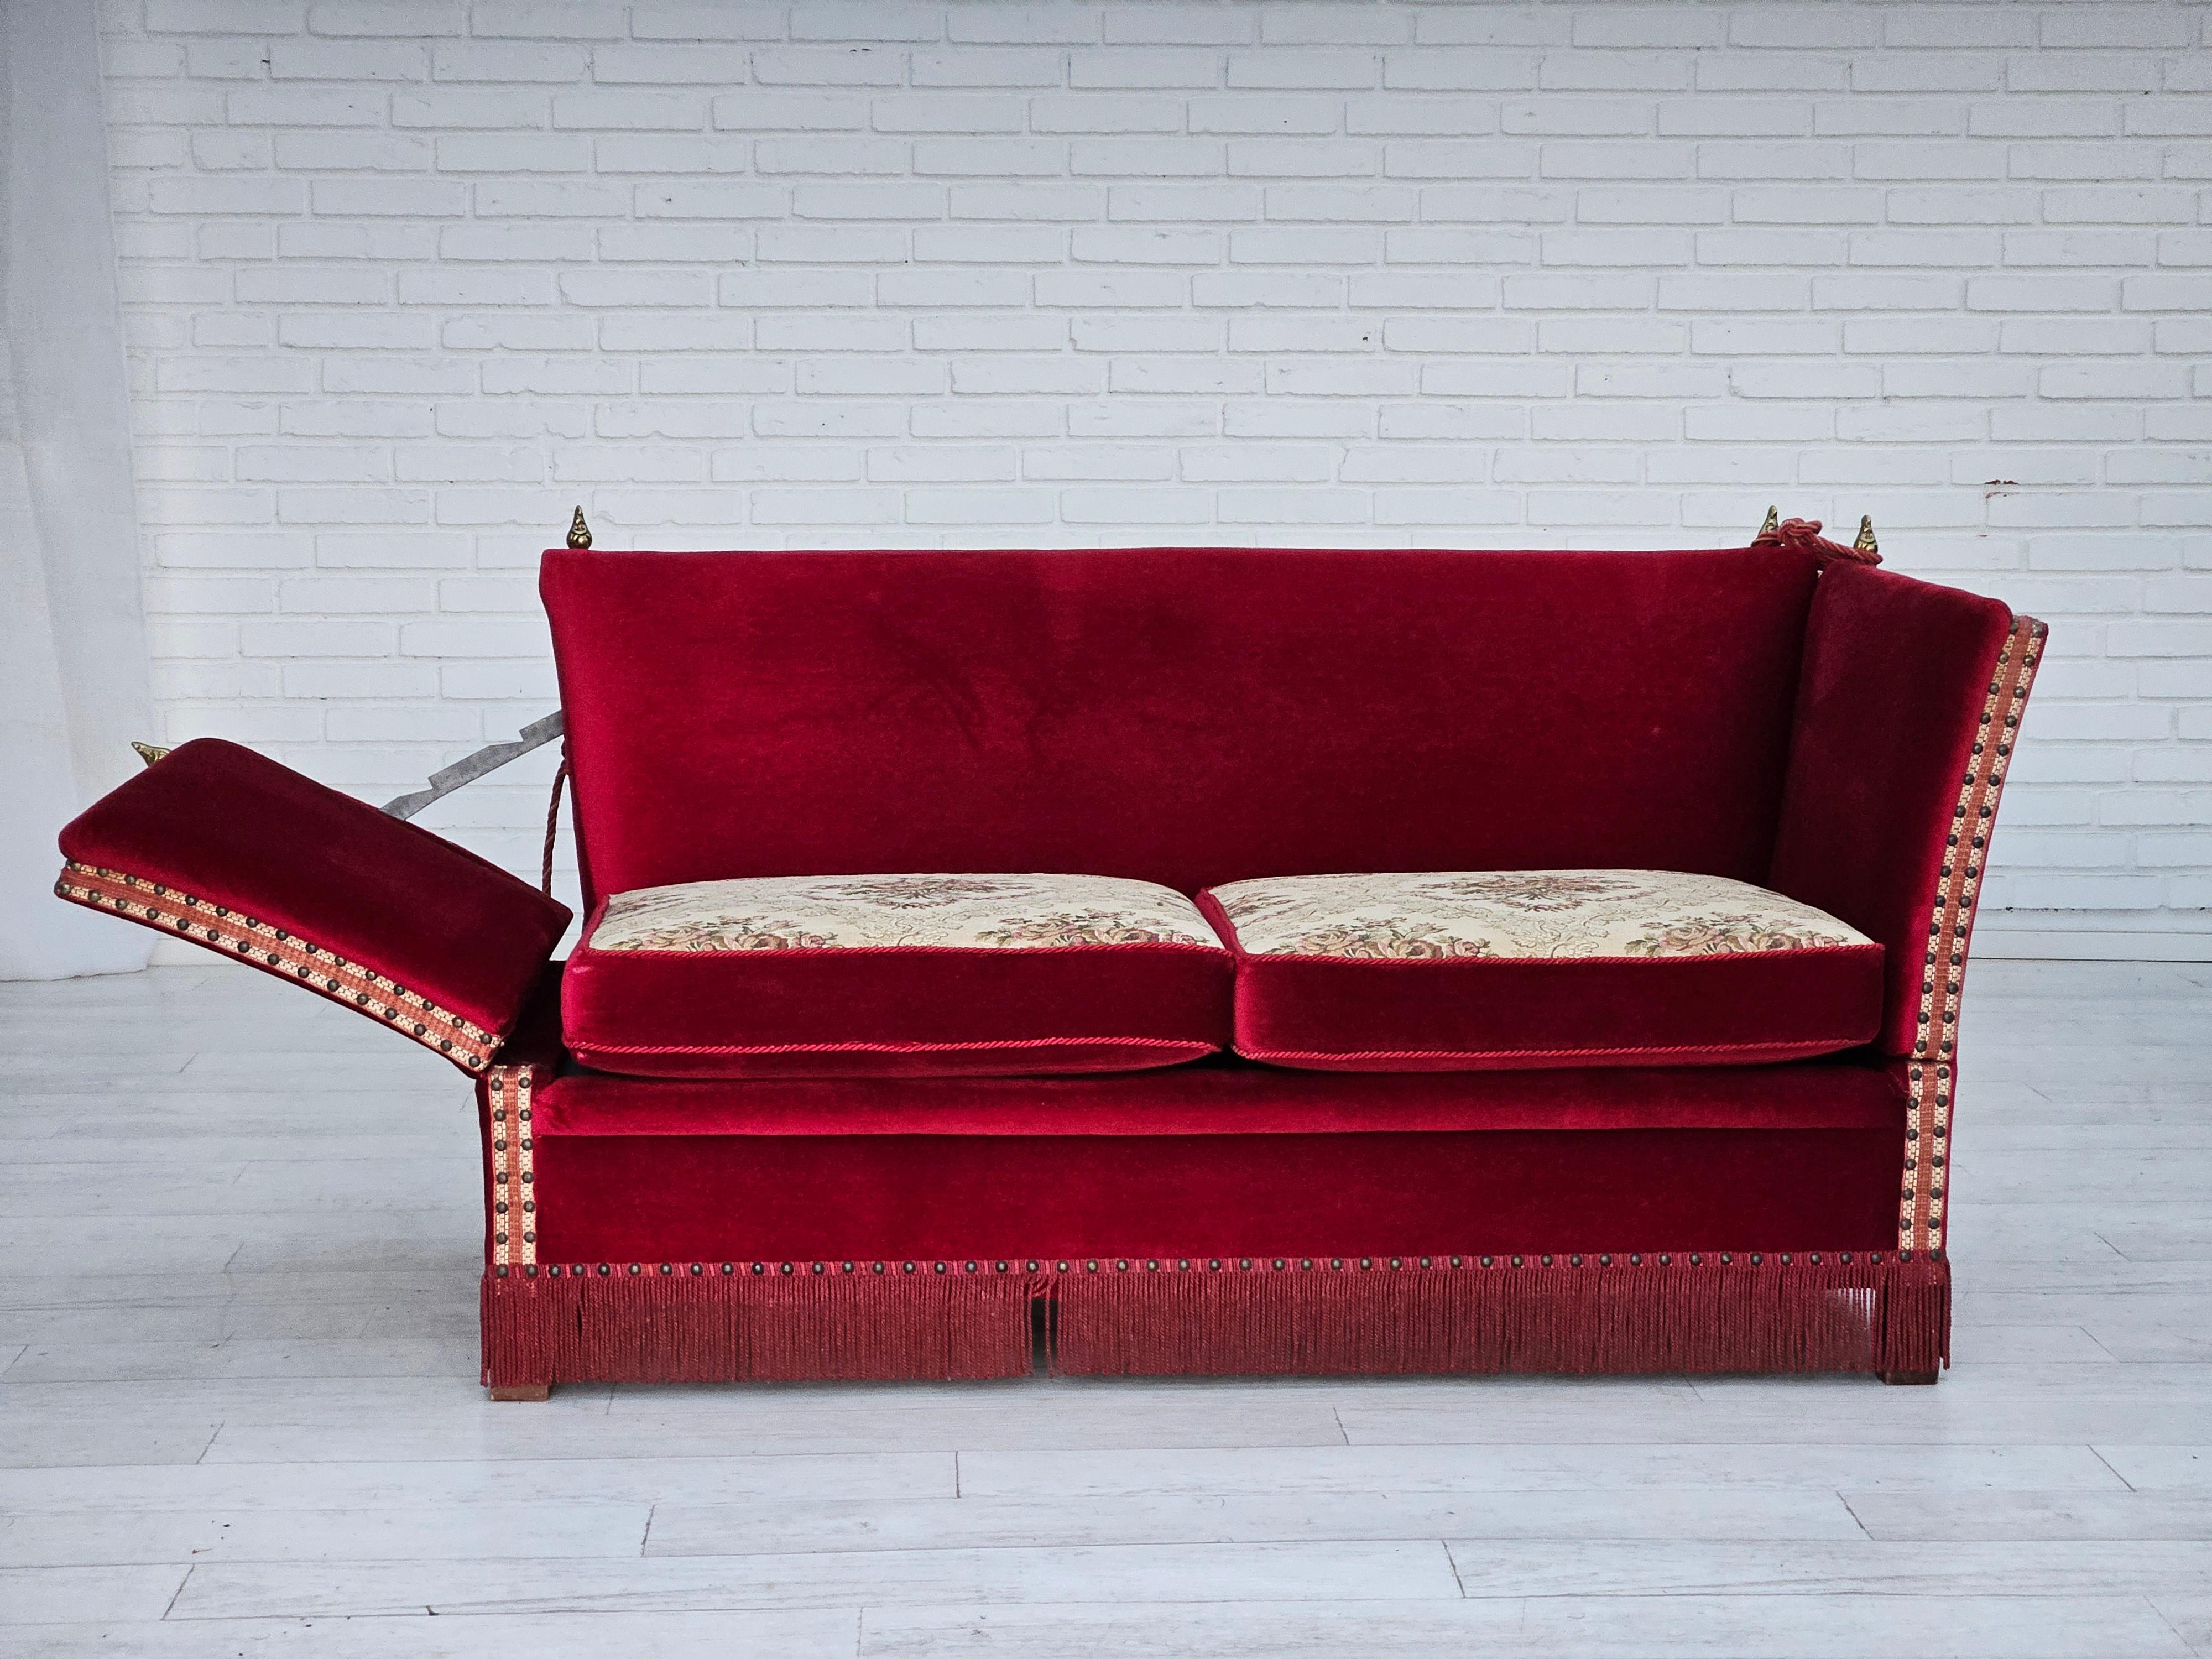 1960s, Danish drop-arm 2 seater sofa in original very good condition: no smells and no stains. Cherry-red velour. Removable double-sided (two different fabrics) seat cushions. Manufactured by Danish furniture manufacturer in about 1960s. Three